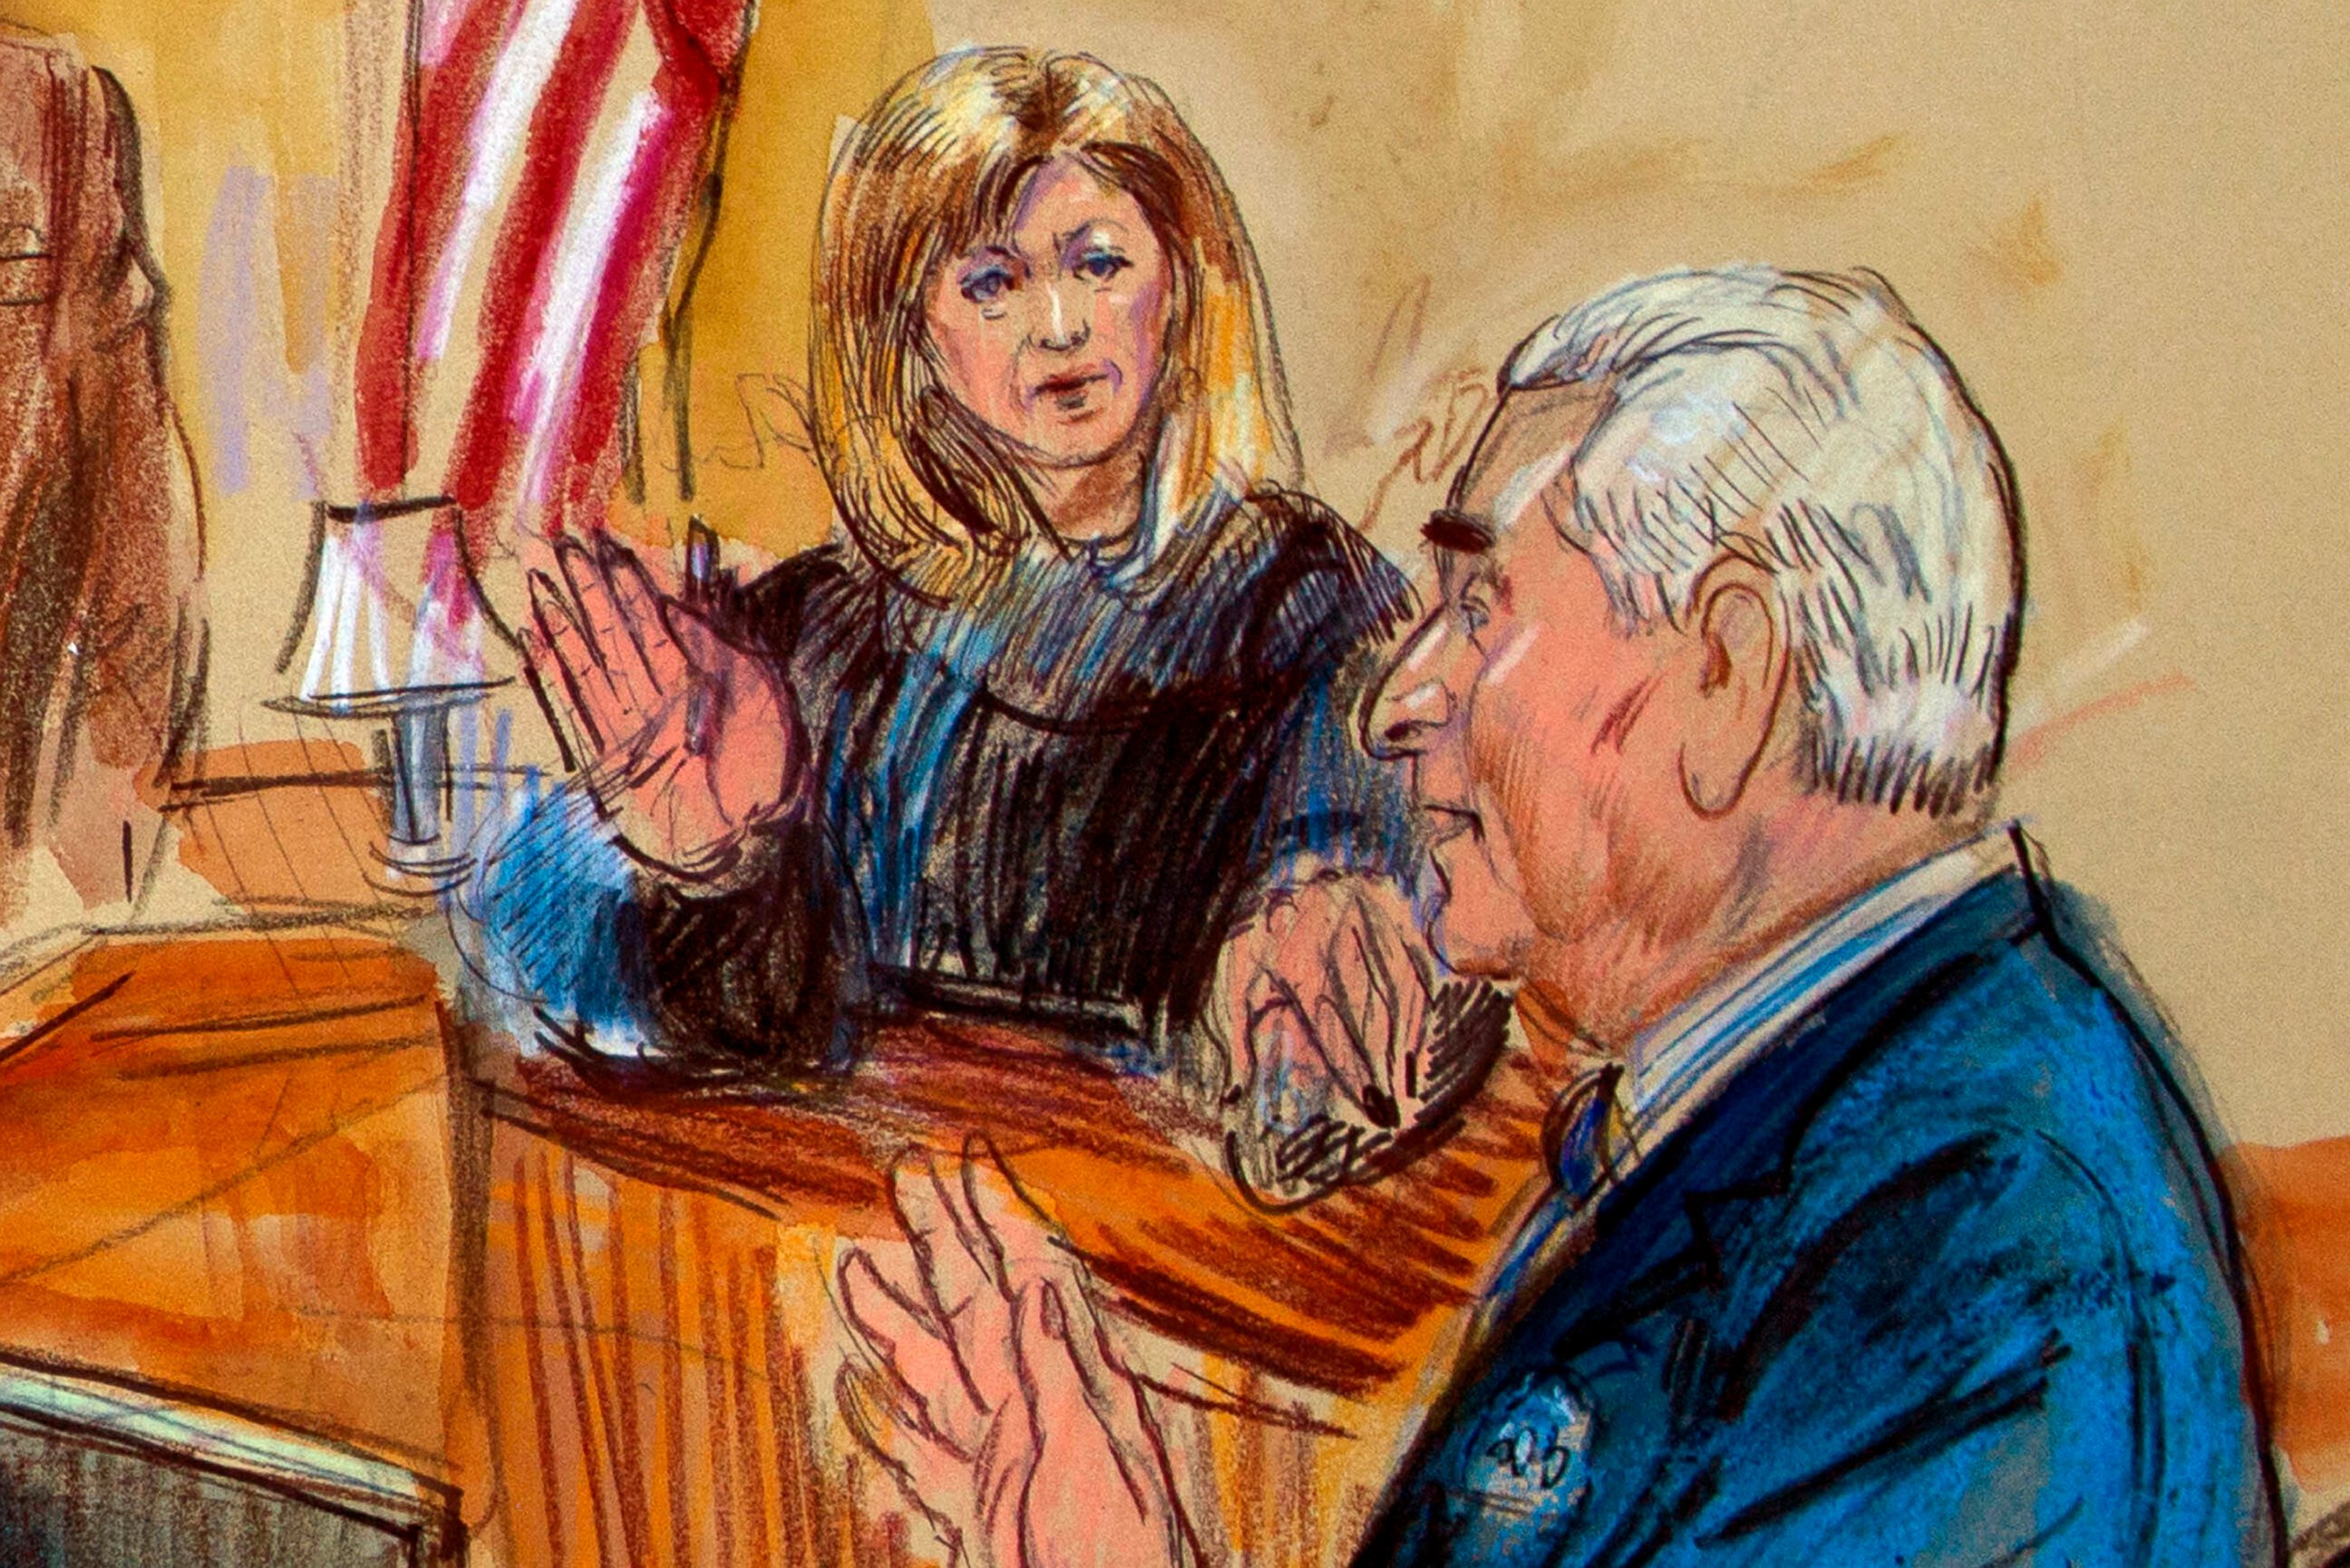 PHOTO: This courtroom sketch shows former campaign adviser for President Donald Trump, Roger Stone talking from the stand as Judge Amy Berman Jackson listens during a court hearing at the U.S. District Courthouse in Washington, Thursday, Feb. 21, 2019.